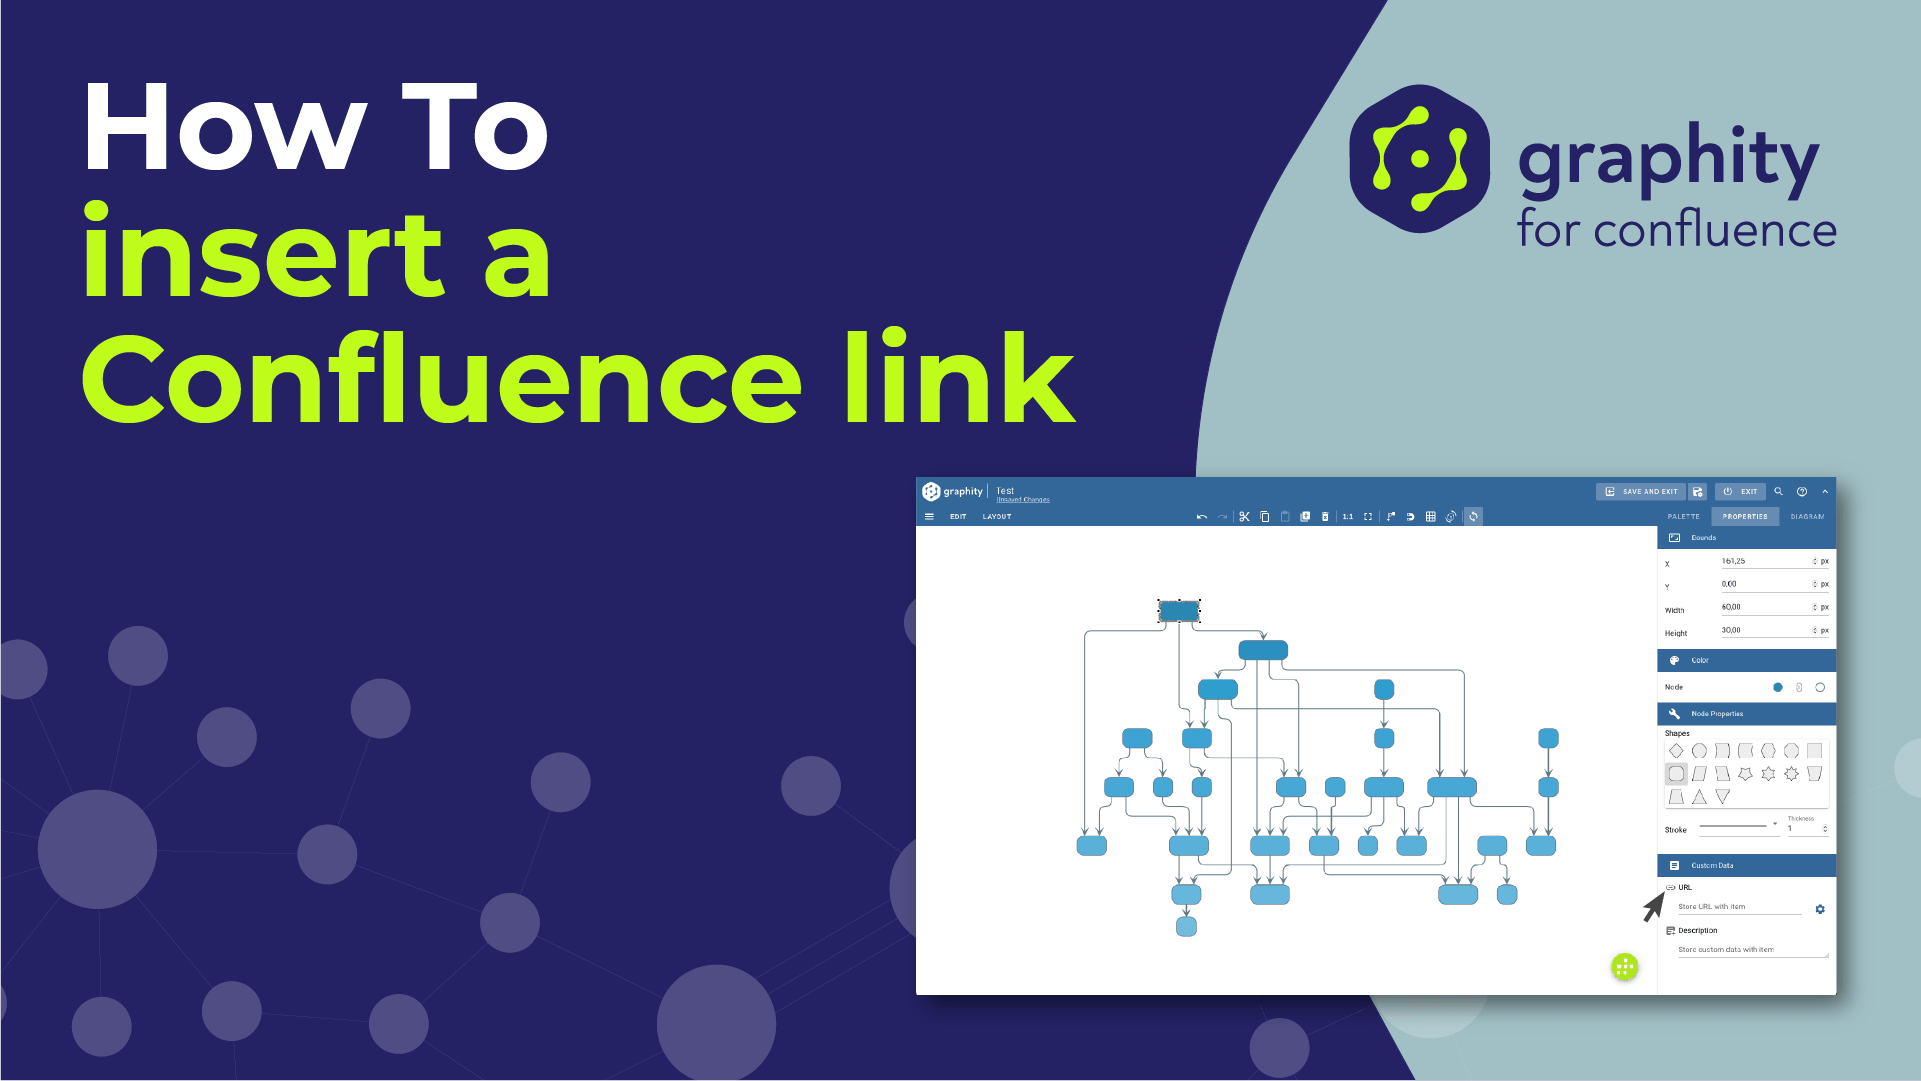 How to insert a Confluence link in Graphity